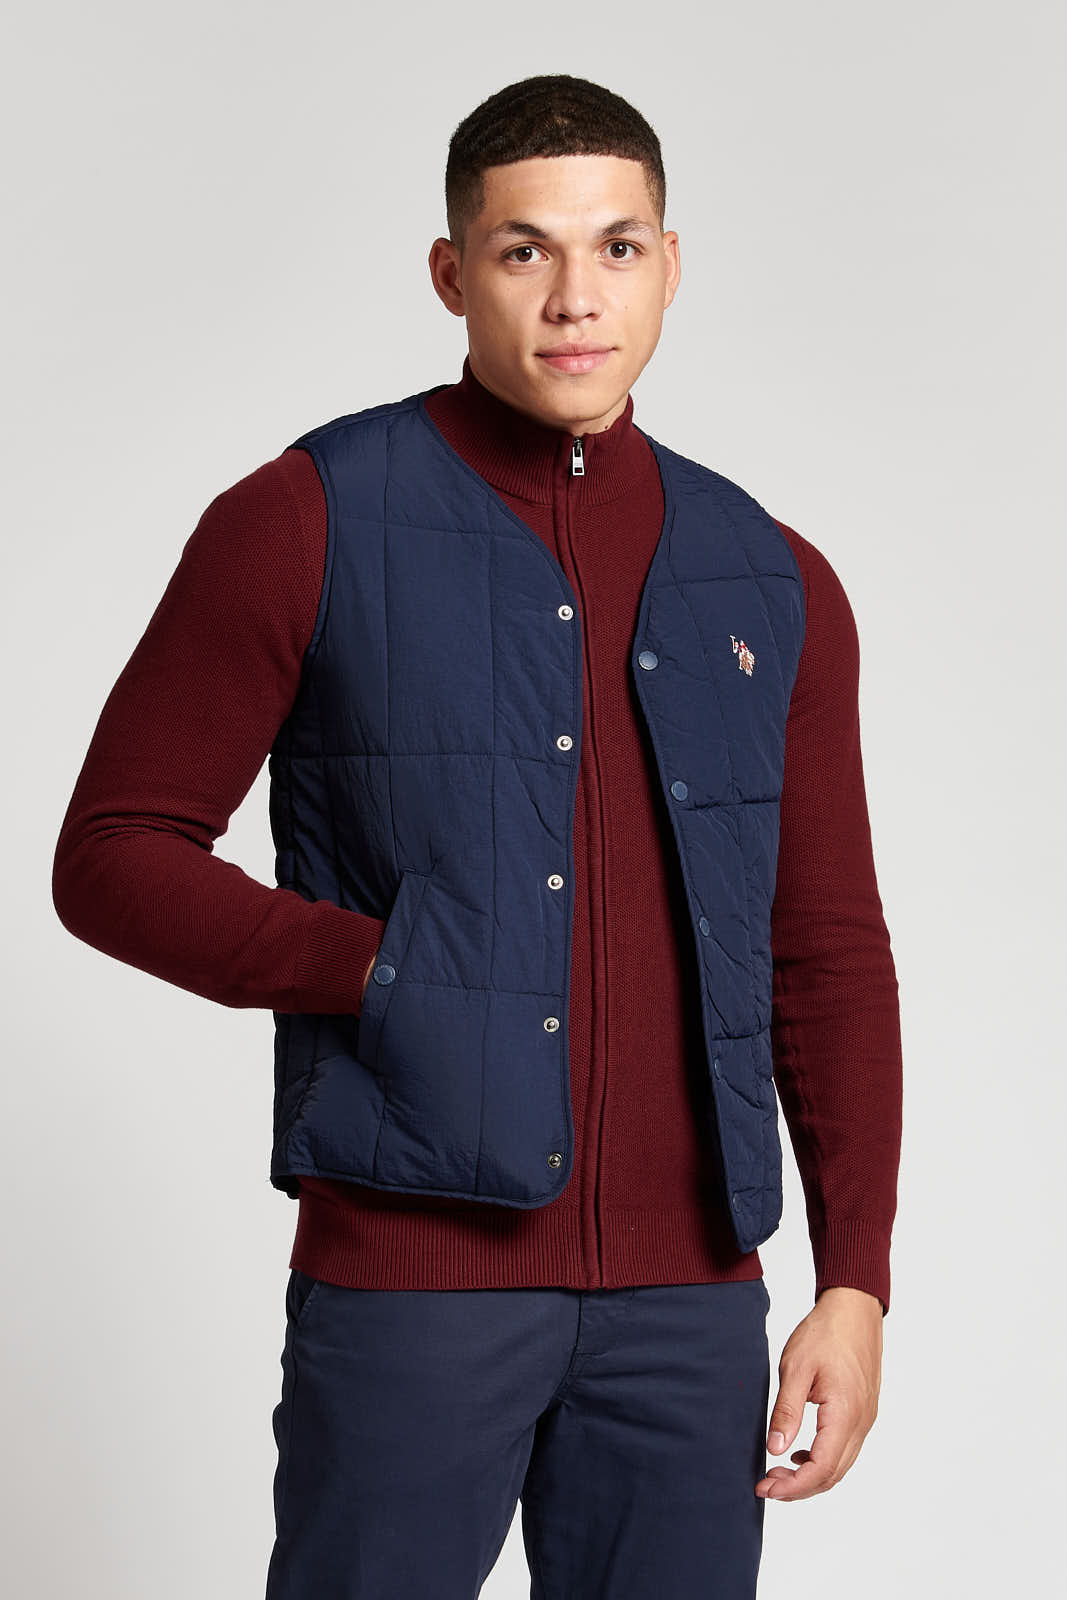 U.S. Polo Assn. Mens Hunting Gilet in Navy Blue